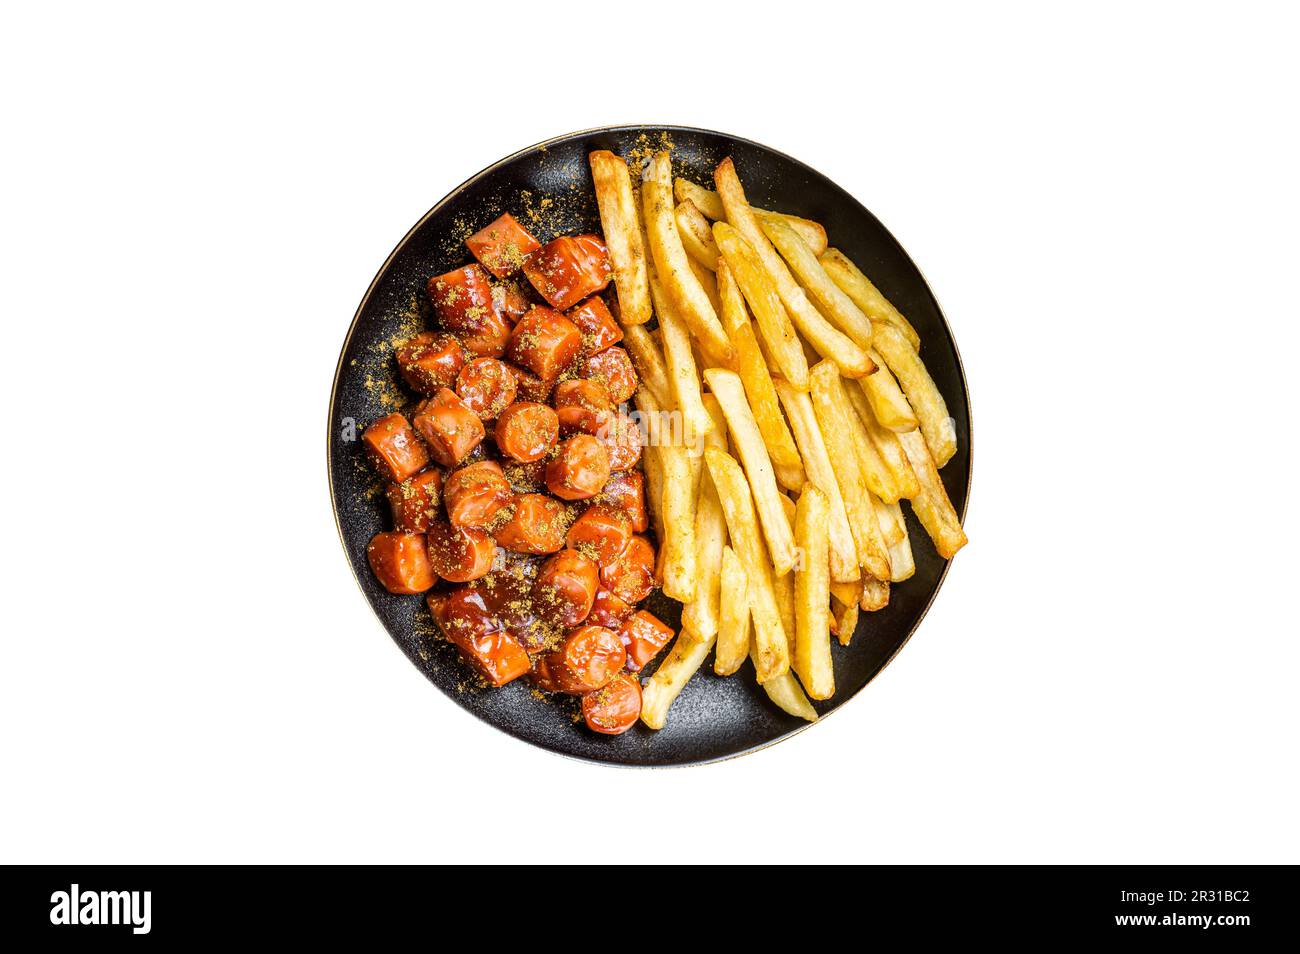 German currywurst meal, curry wurst with french fry served in a plate. Isolated on white background Stock Photo